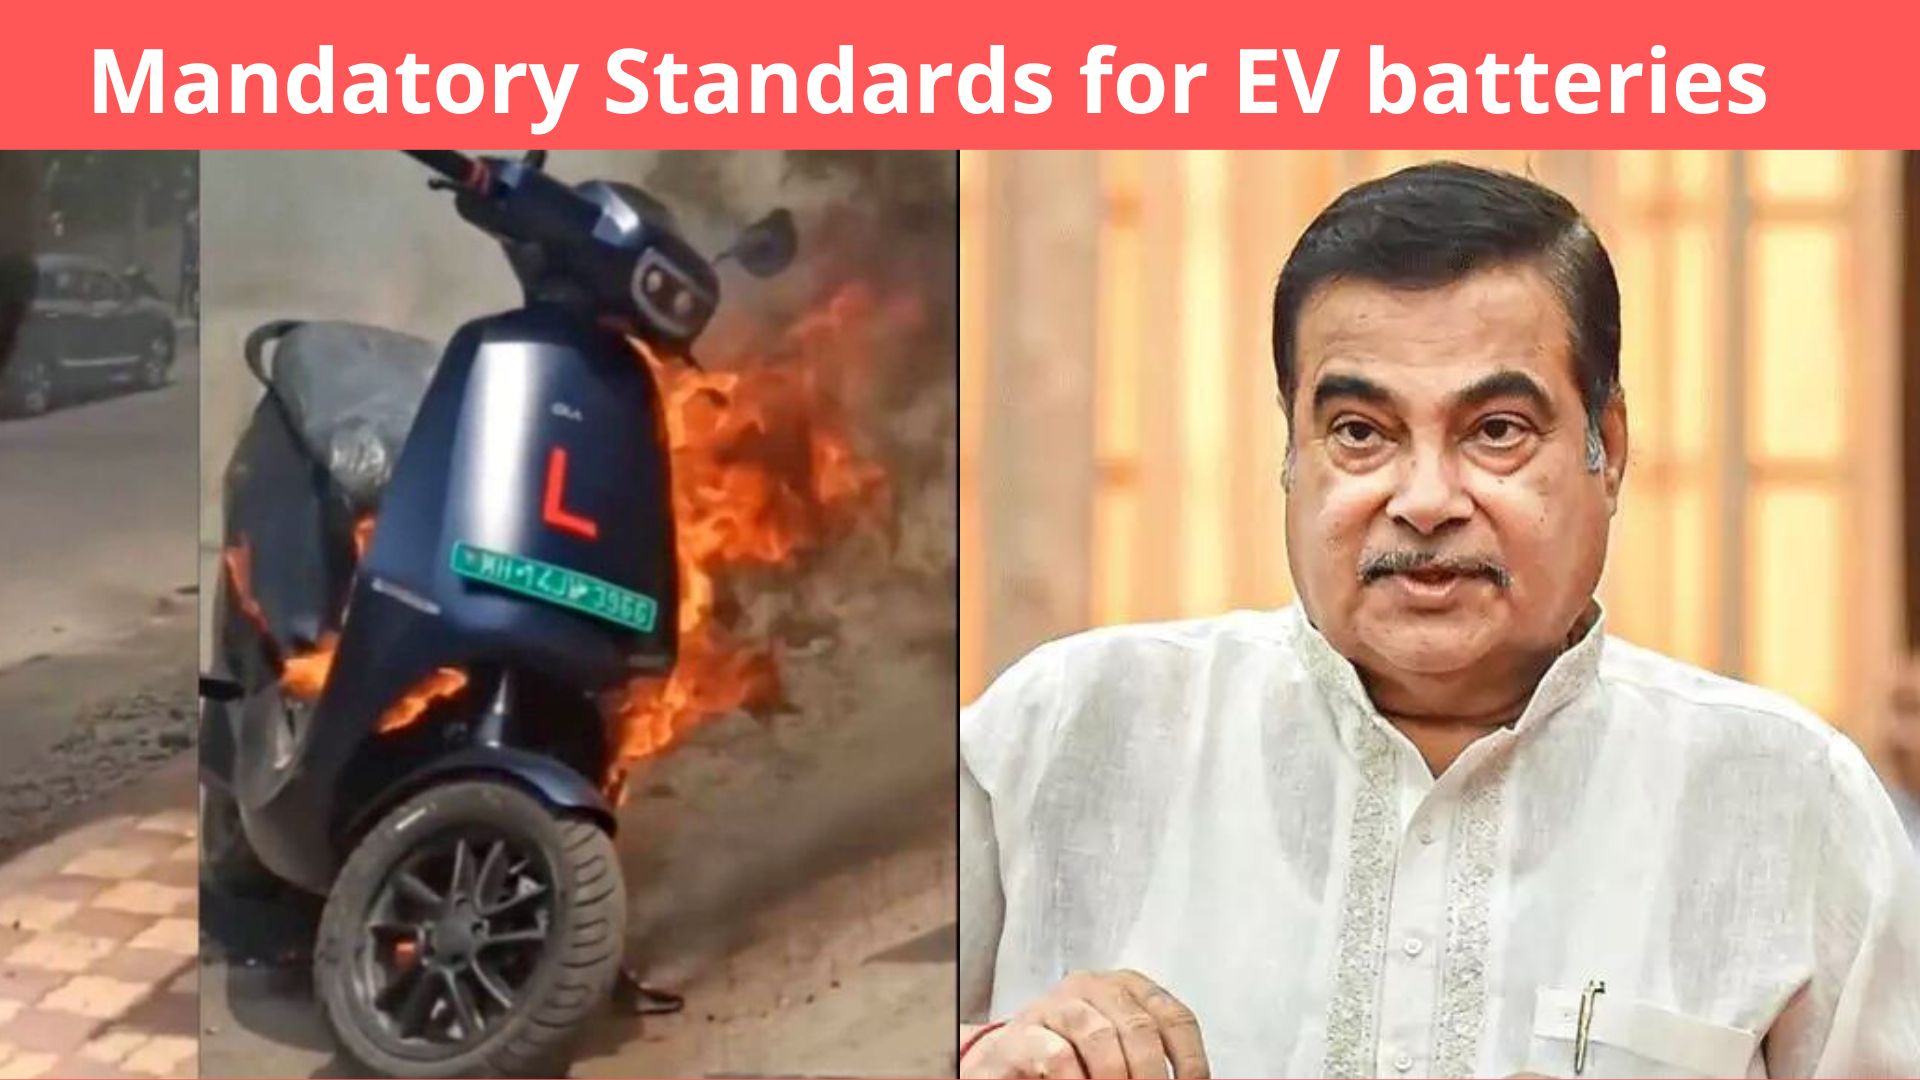 https://e-vehicleinfo.com/strict-standards-for-ev-batteries-in-the-next-2-months/